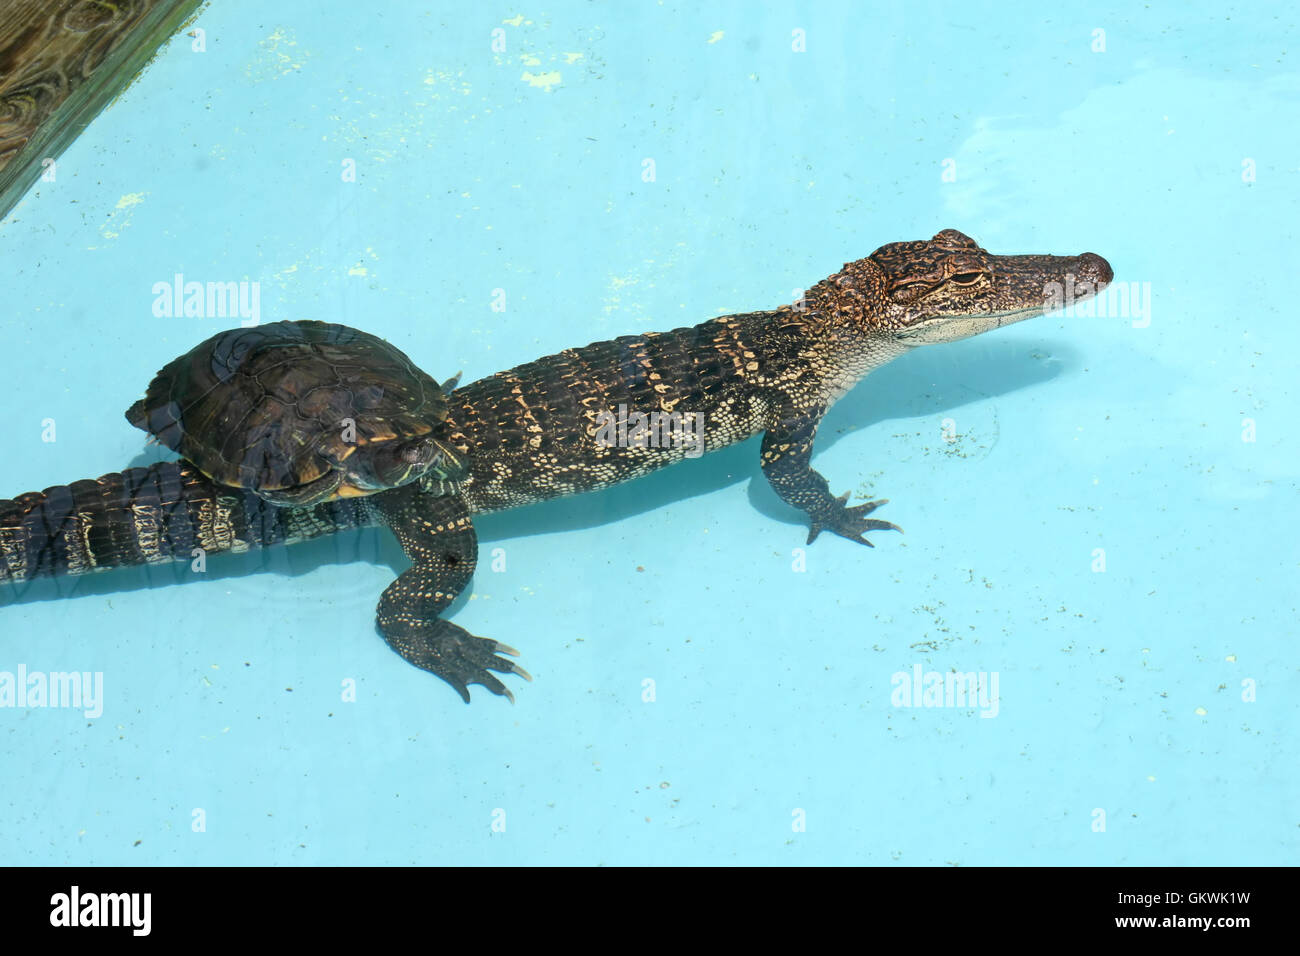 An Alligator and a Turtle swimming in water. Stock Photo